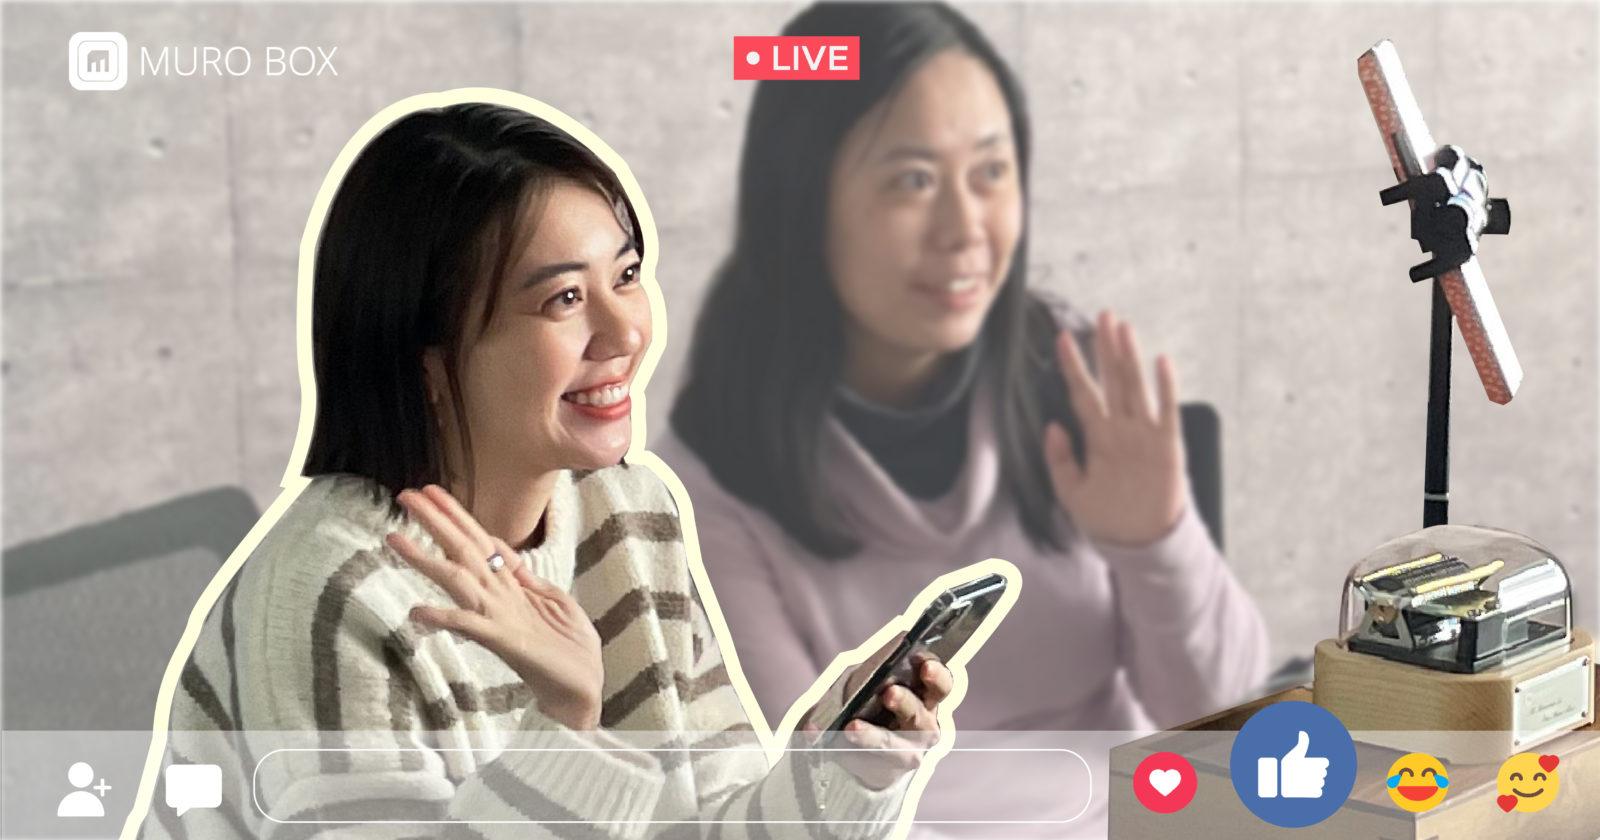 Wei Wei, a live streamer from Singapore, came across Muro Box while looking for unique products in Taiwan, and decided to host a special webcast - sharing emotional stories with live music box performances!